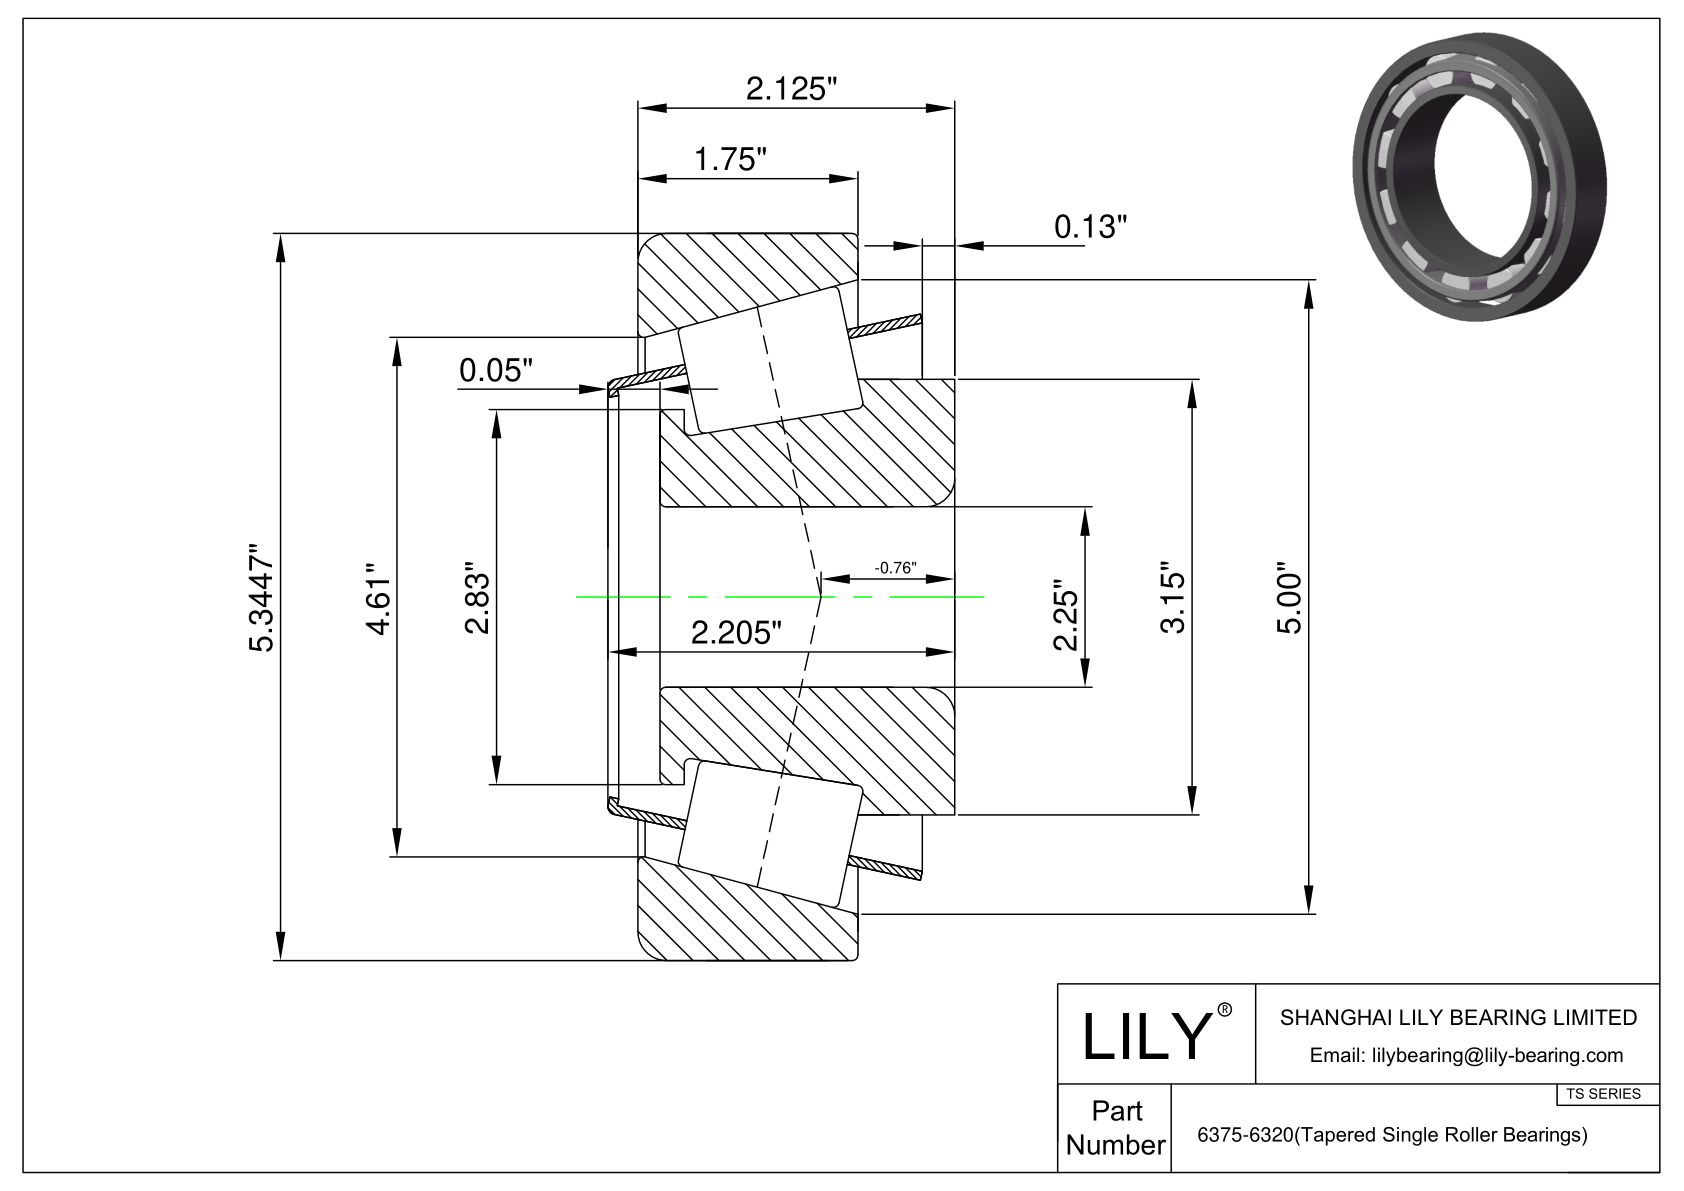 6375-6320 TS (Tapered Single Roller Bearings) (Imperial) cad drawing